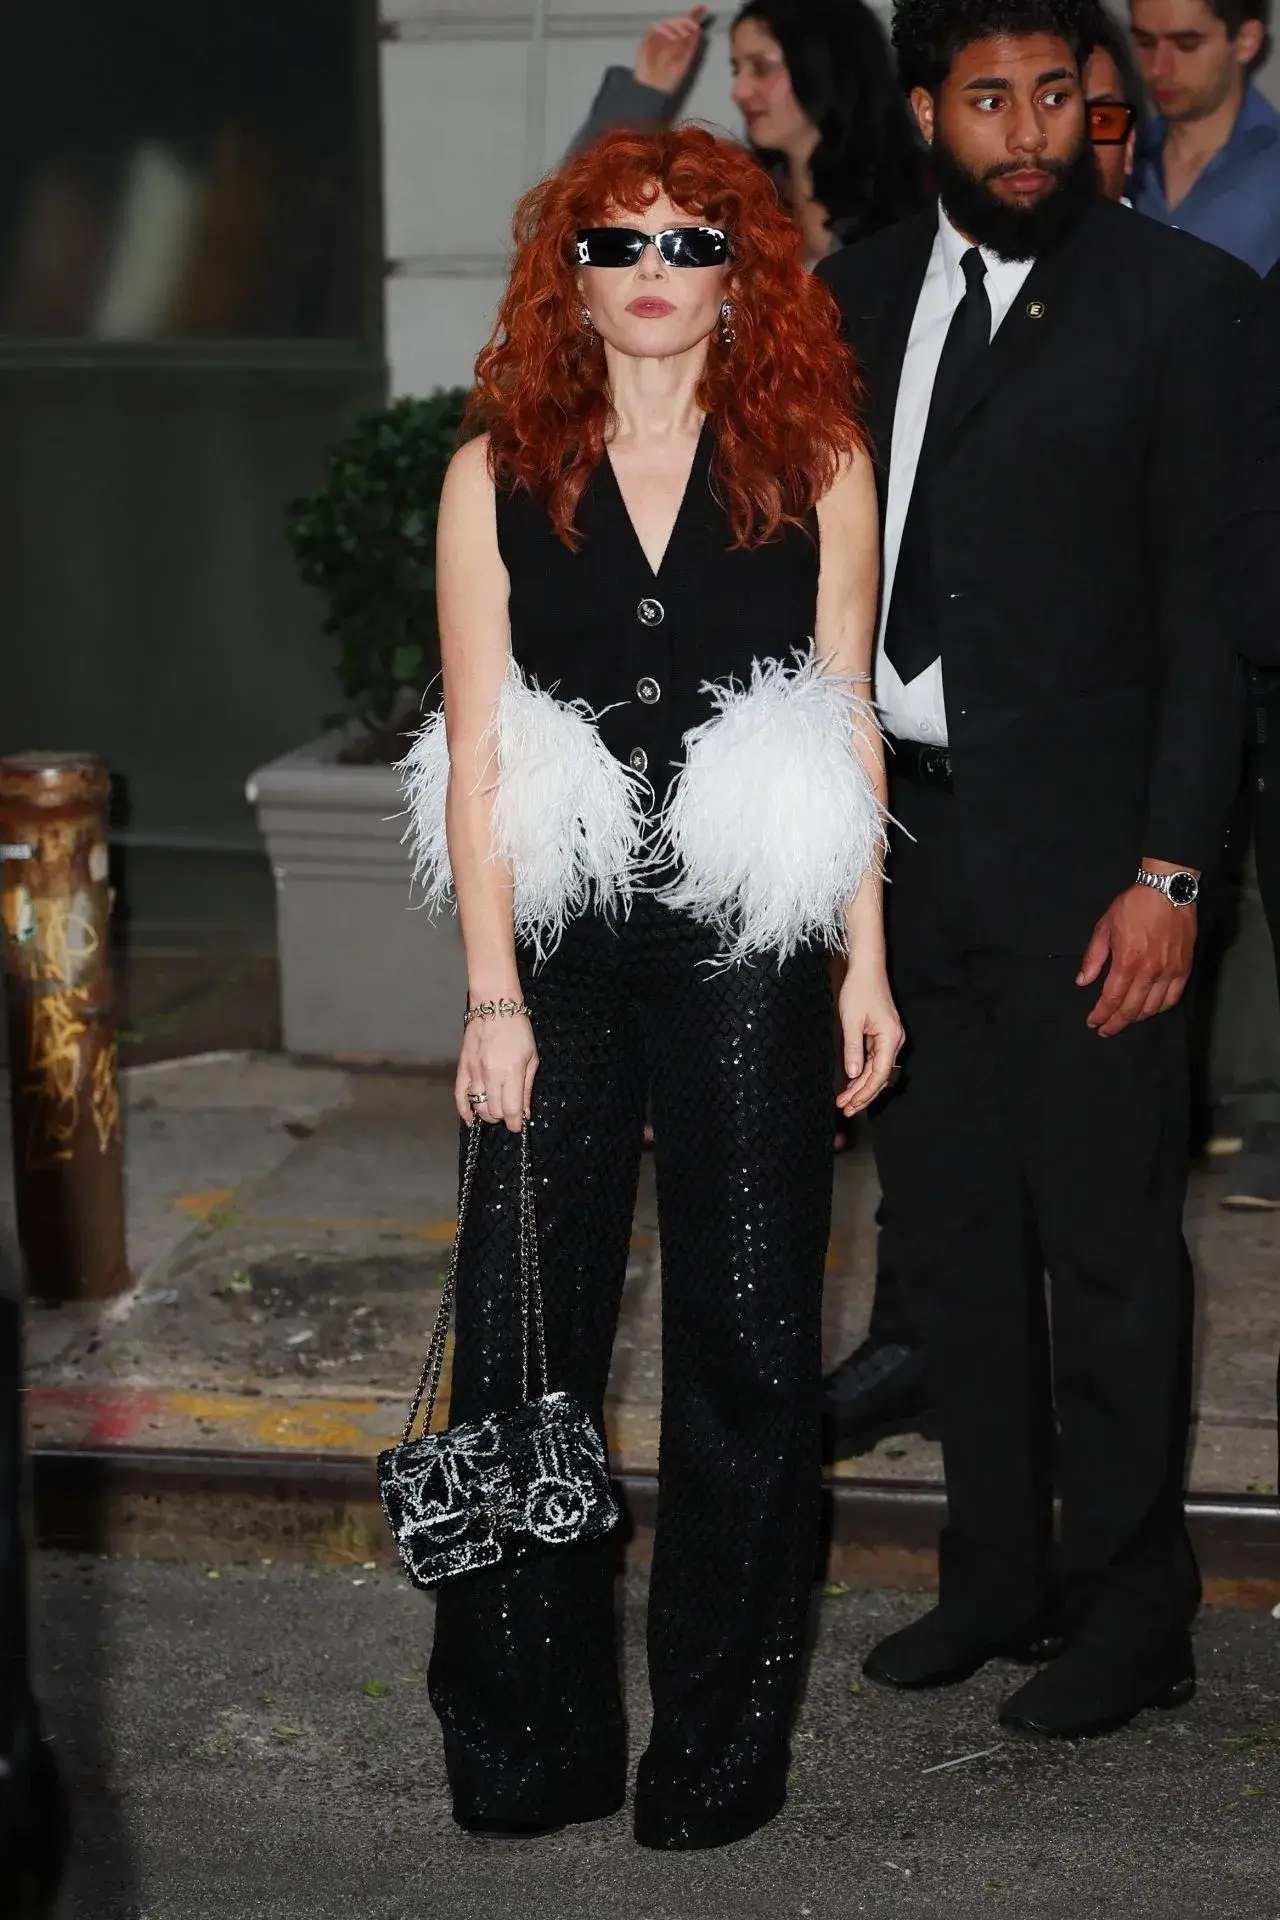 NATASHA LYONNE AT THE CHANEL TRIBECA FESTIVAL ARTISTS DINNER AT THE ODEON IN NEW YORK